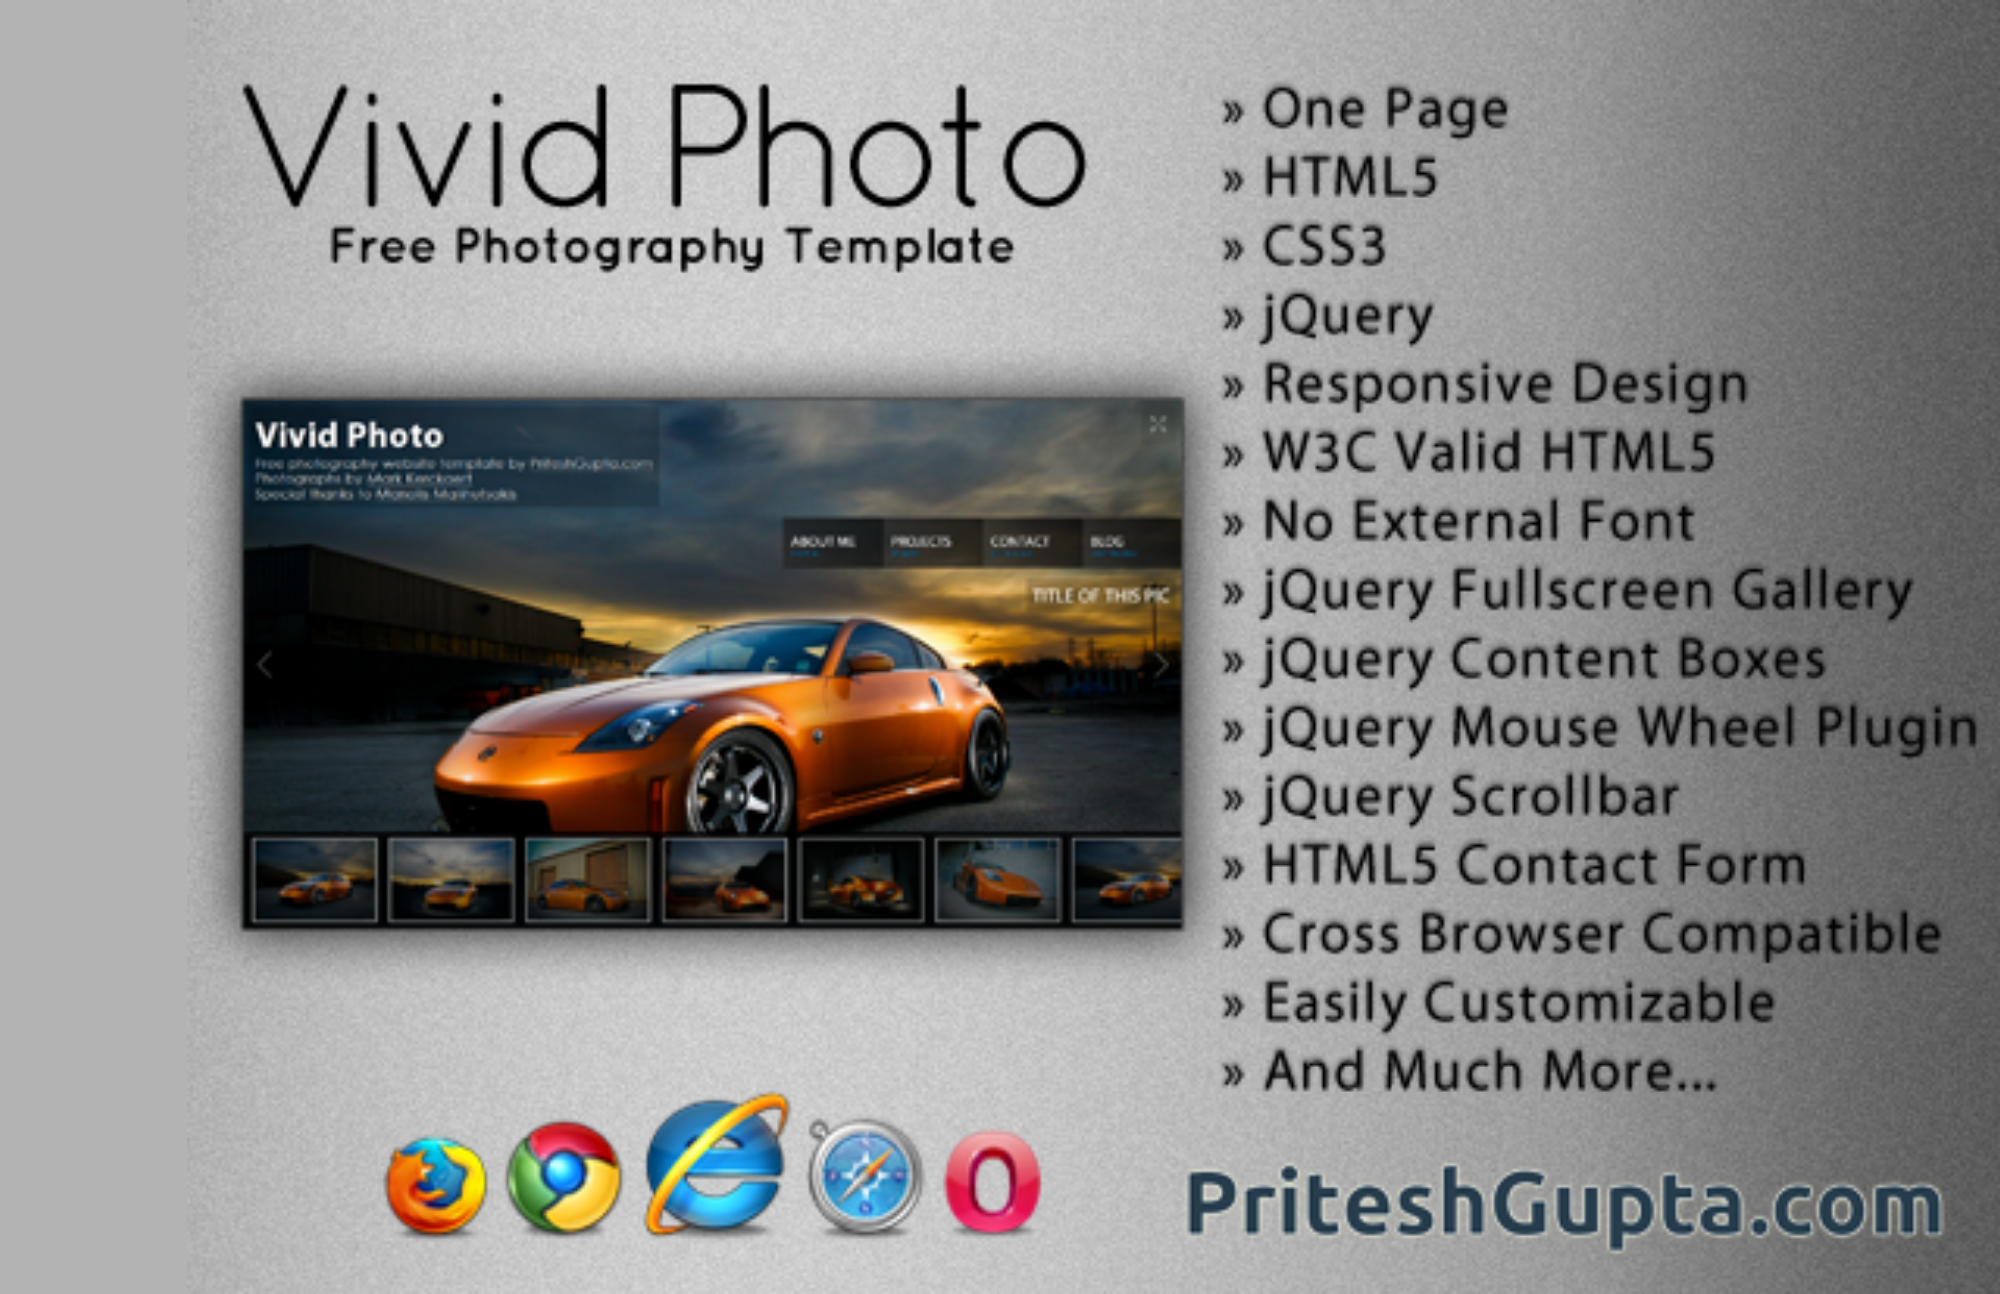 The features of Vivid Photo and the different kinds of browsers